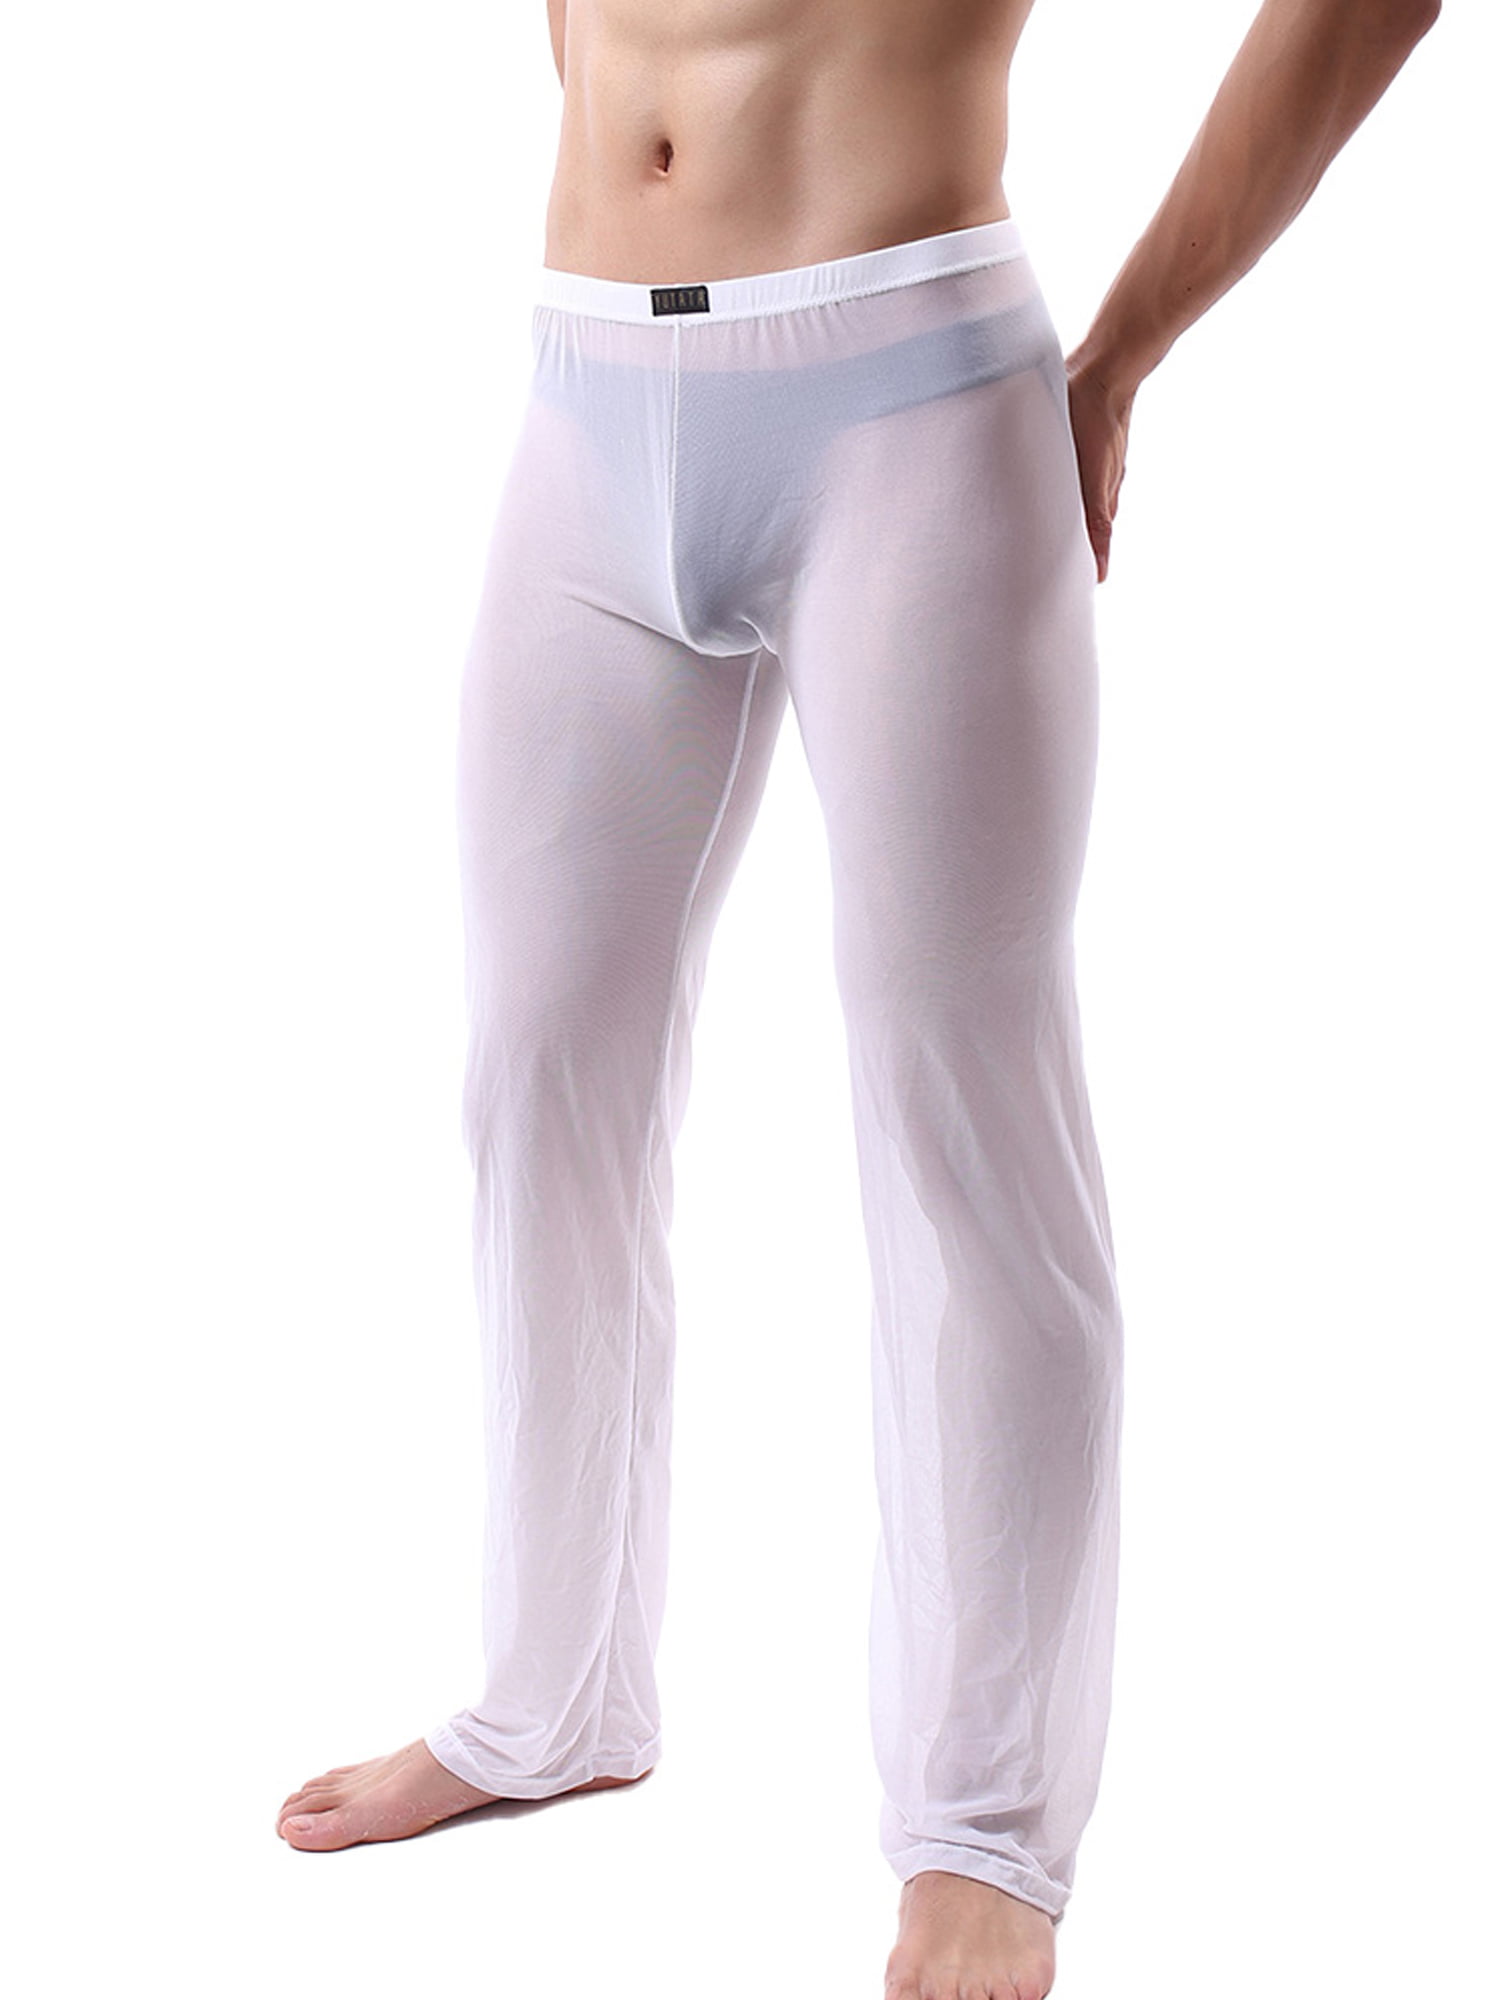 Details about   Sexy Men Sheer Mesh Long John Pants Tight Pants See Through Underwear Underpants